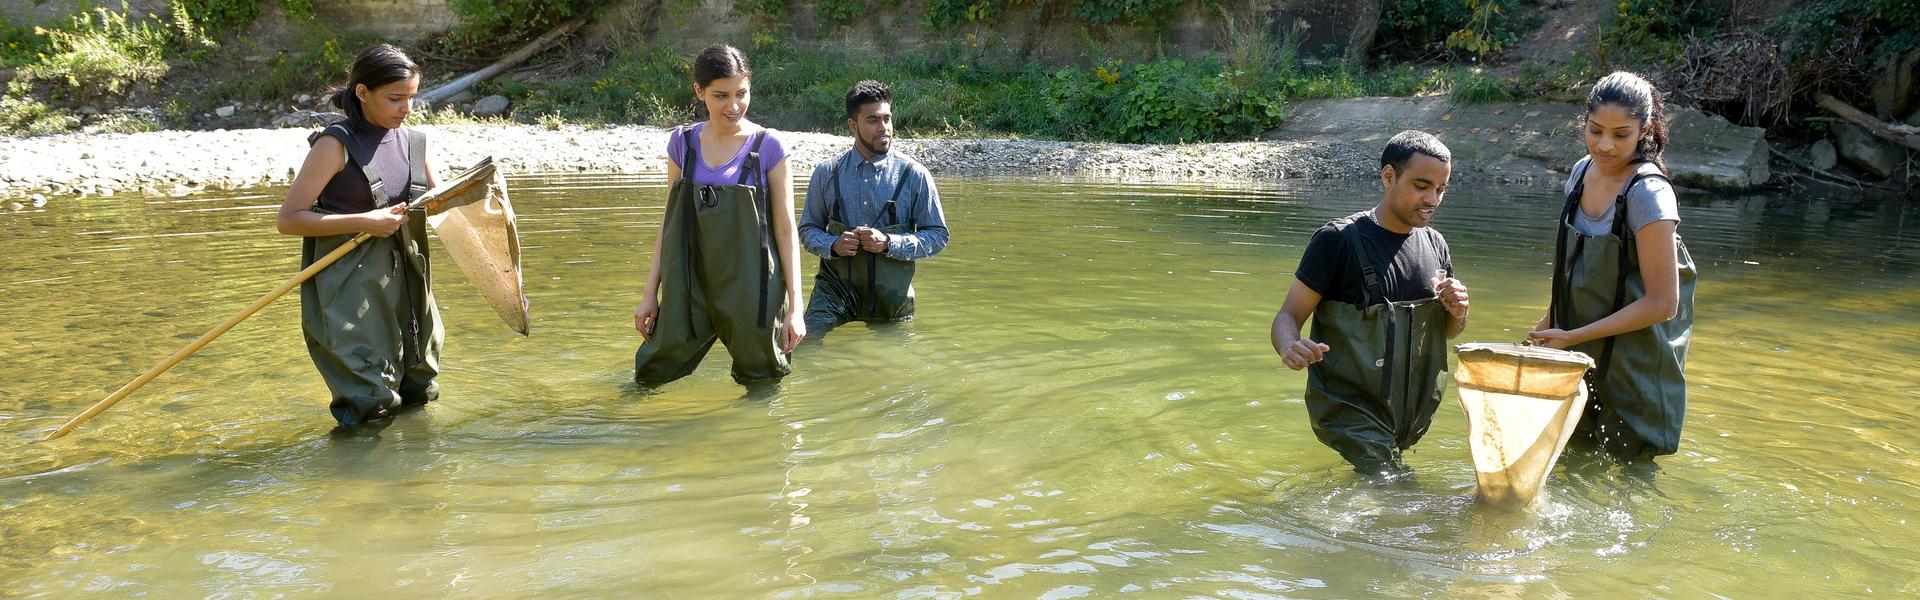 Students on a field trip in the water at the base of an incline, with nets